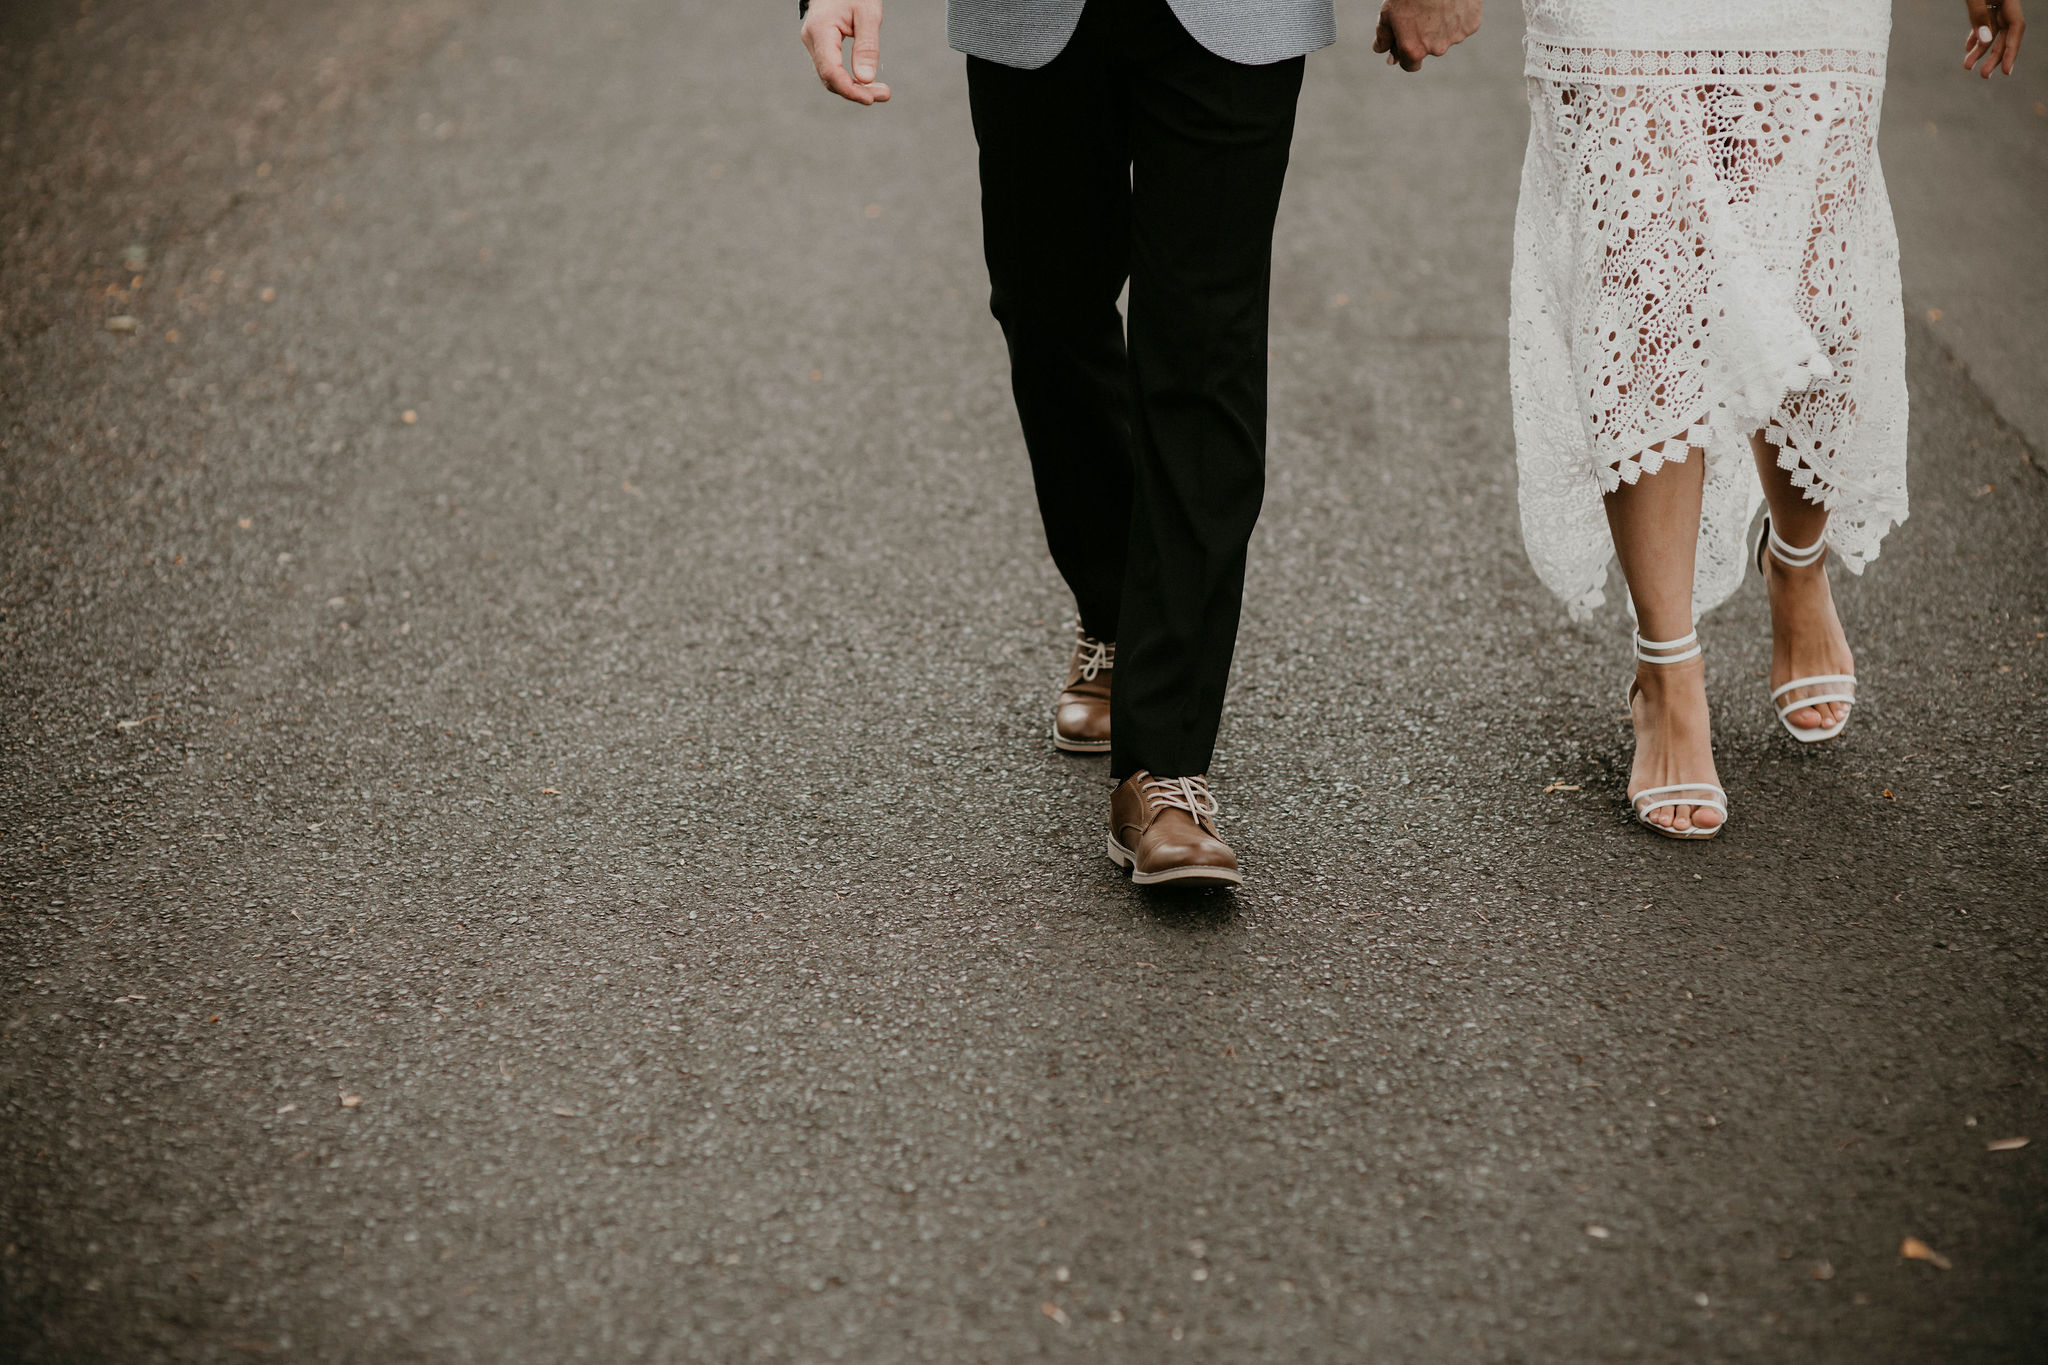 Lets-Elope-Melbourne-Celebrant-Photographer-Elopement-Package-Victoria-Sarah-Matler-Photography-Elope-at-Home-Footscray-weddings-intimate-20